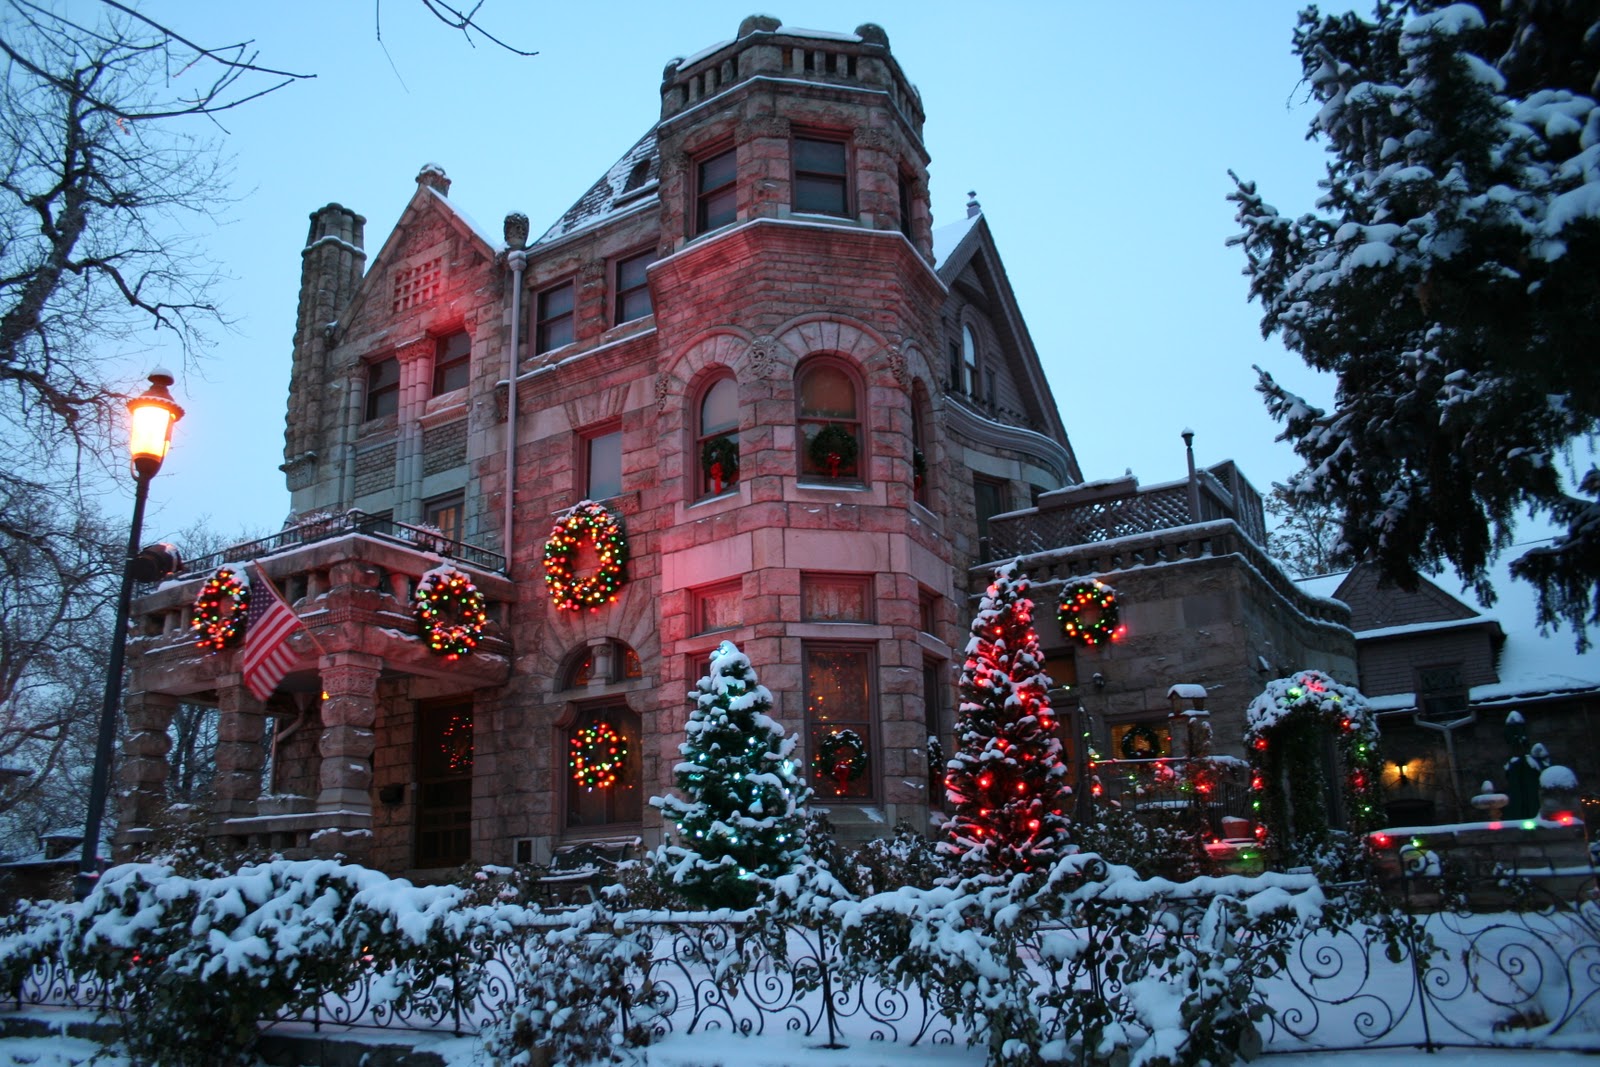 Castle Marne Bed and Breakfast: Celebrate the Holidays 